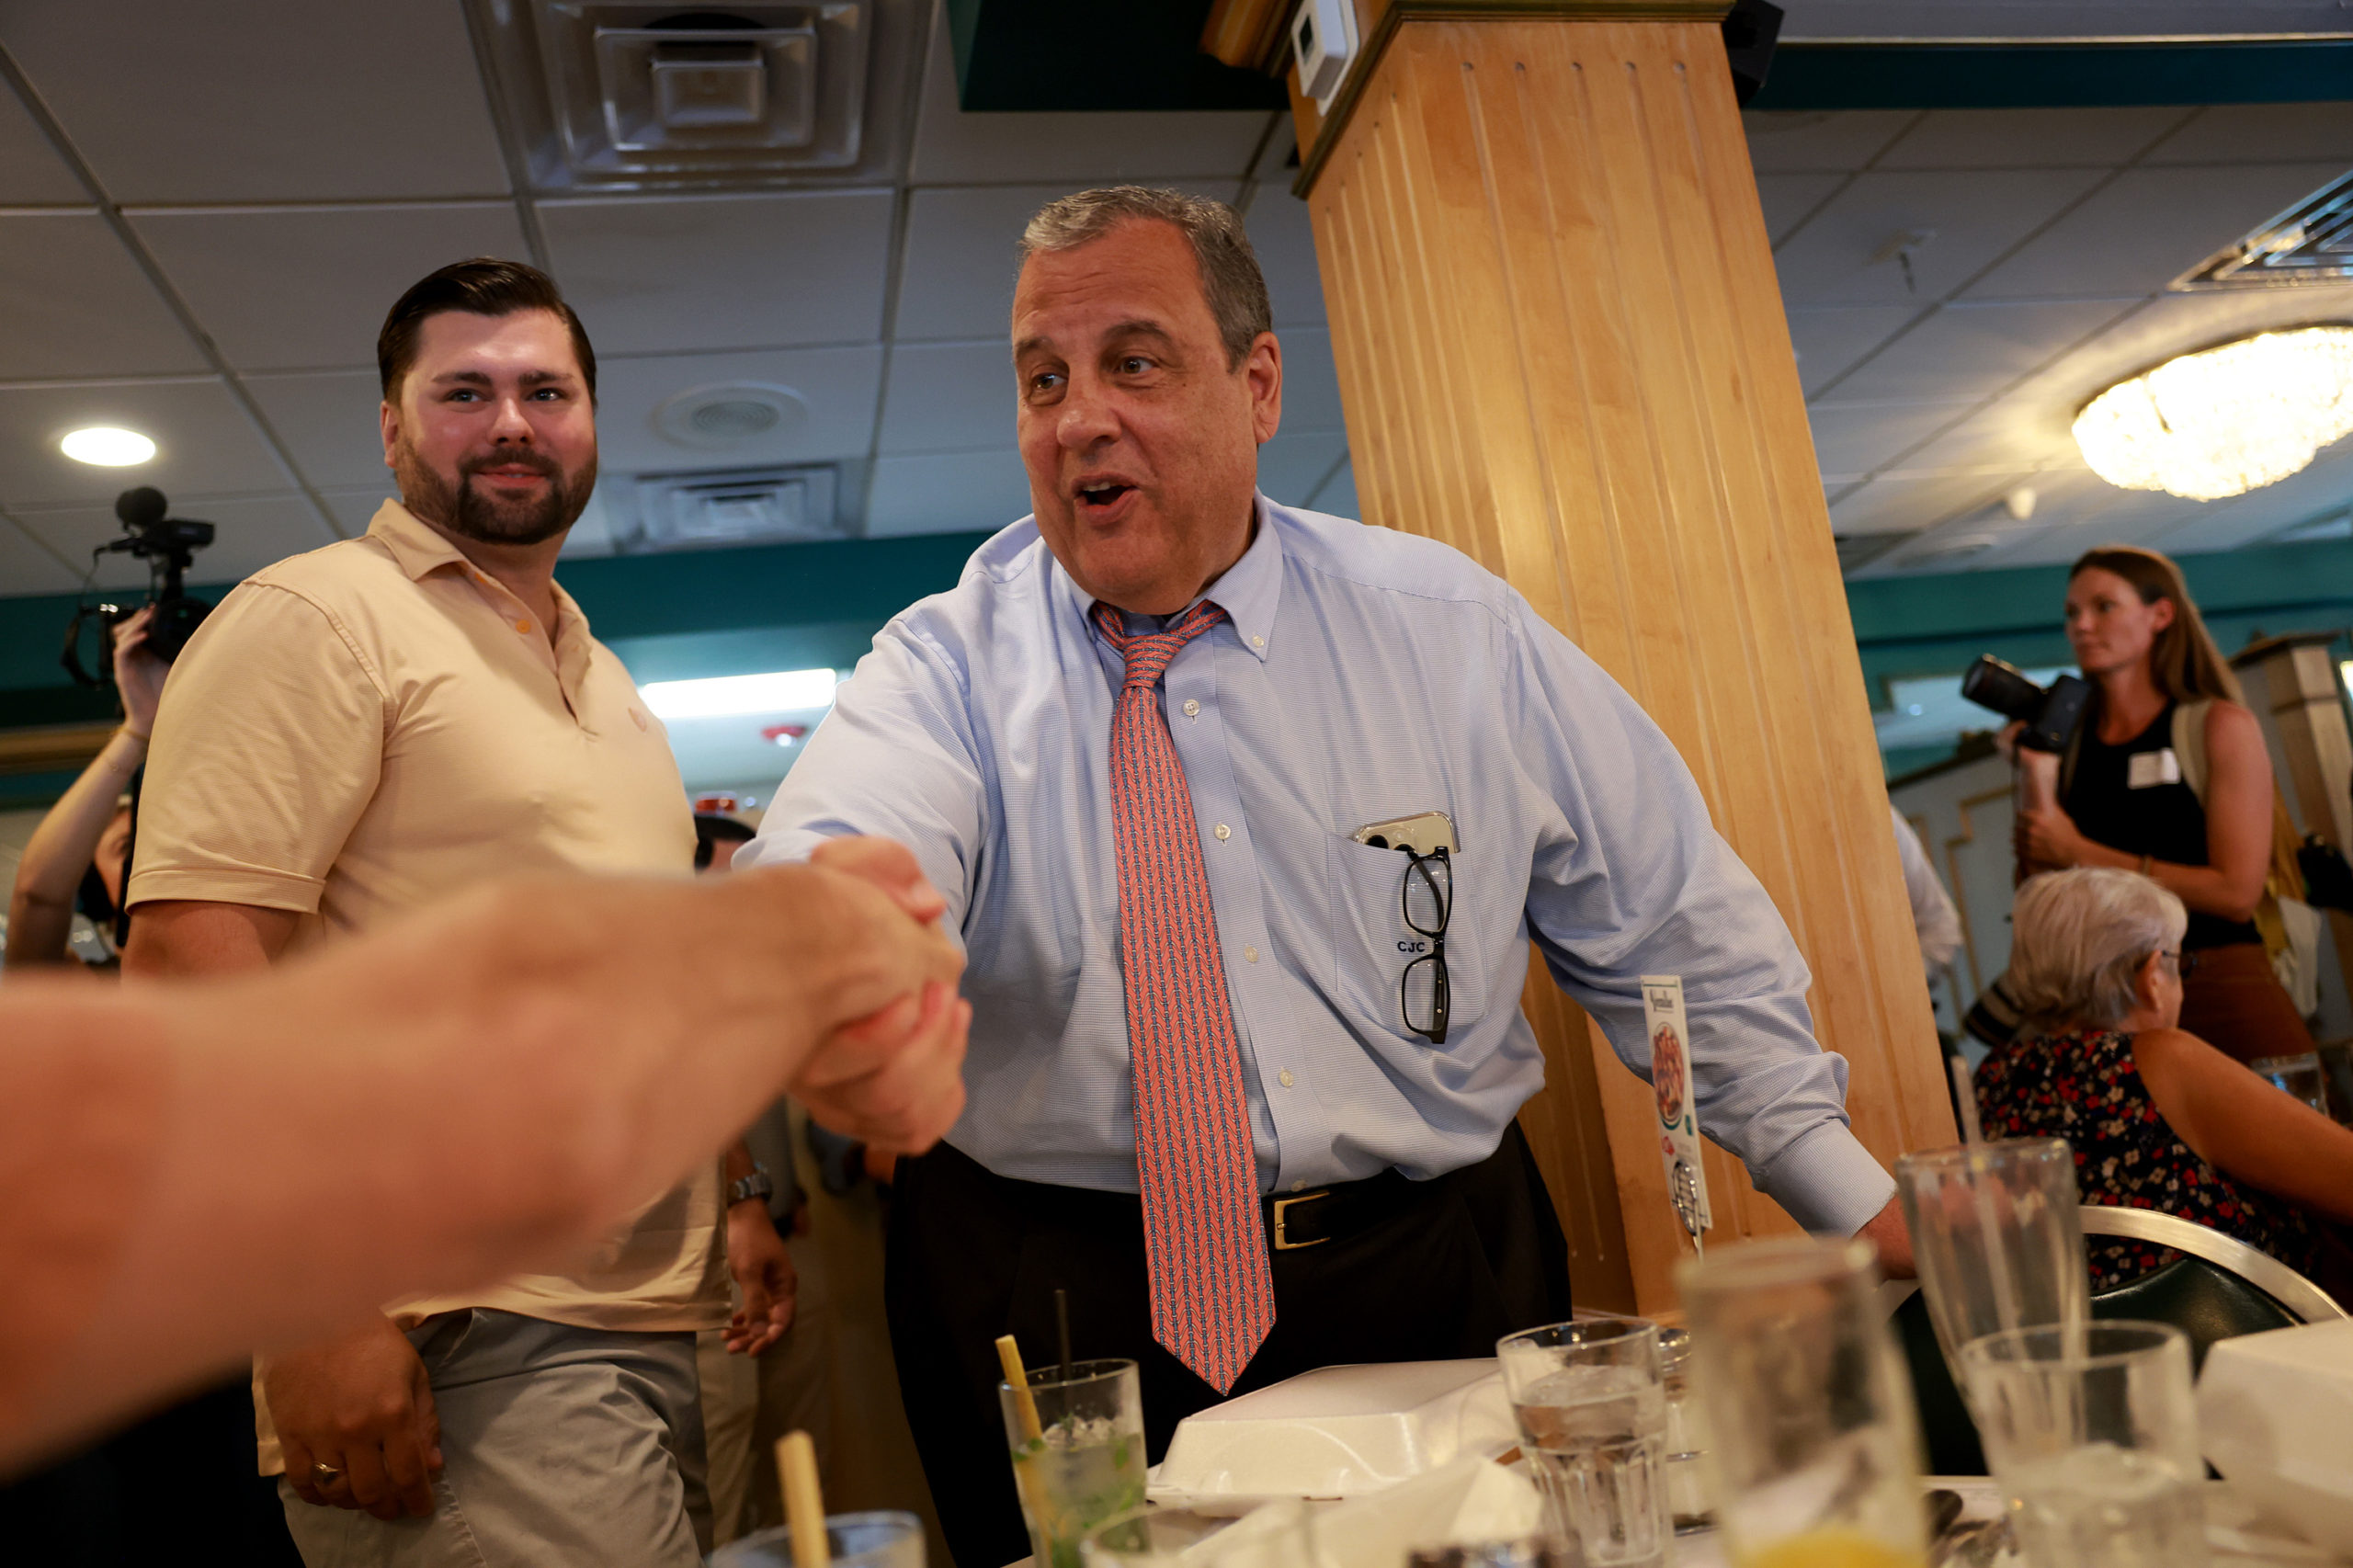 MIAMI, FLORIDA - AUGUST 18: Former New Jersey Gov. and Republican presidential candidate Chris Christie greets people during a campaign stop at the Versailles Restaurant on August 18, 2023 in Miami, Florida. (Joe Raedle/Getty Images)